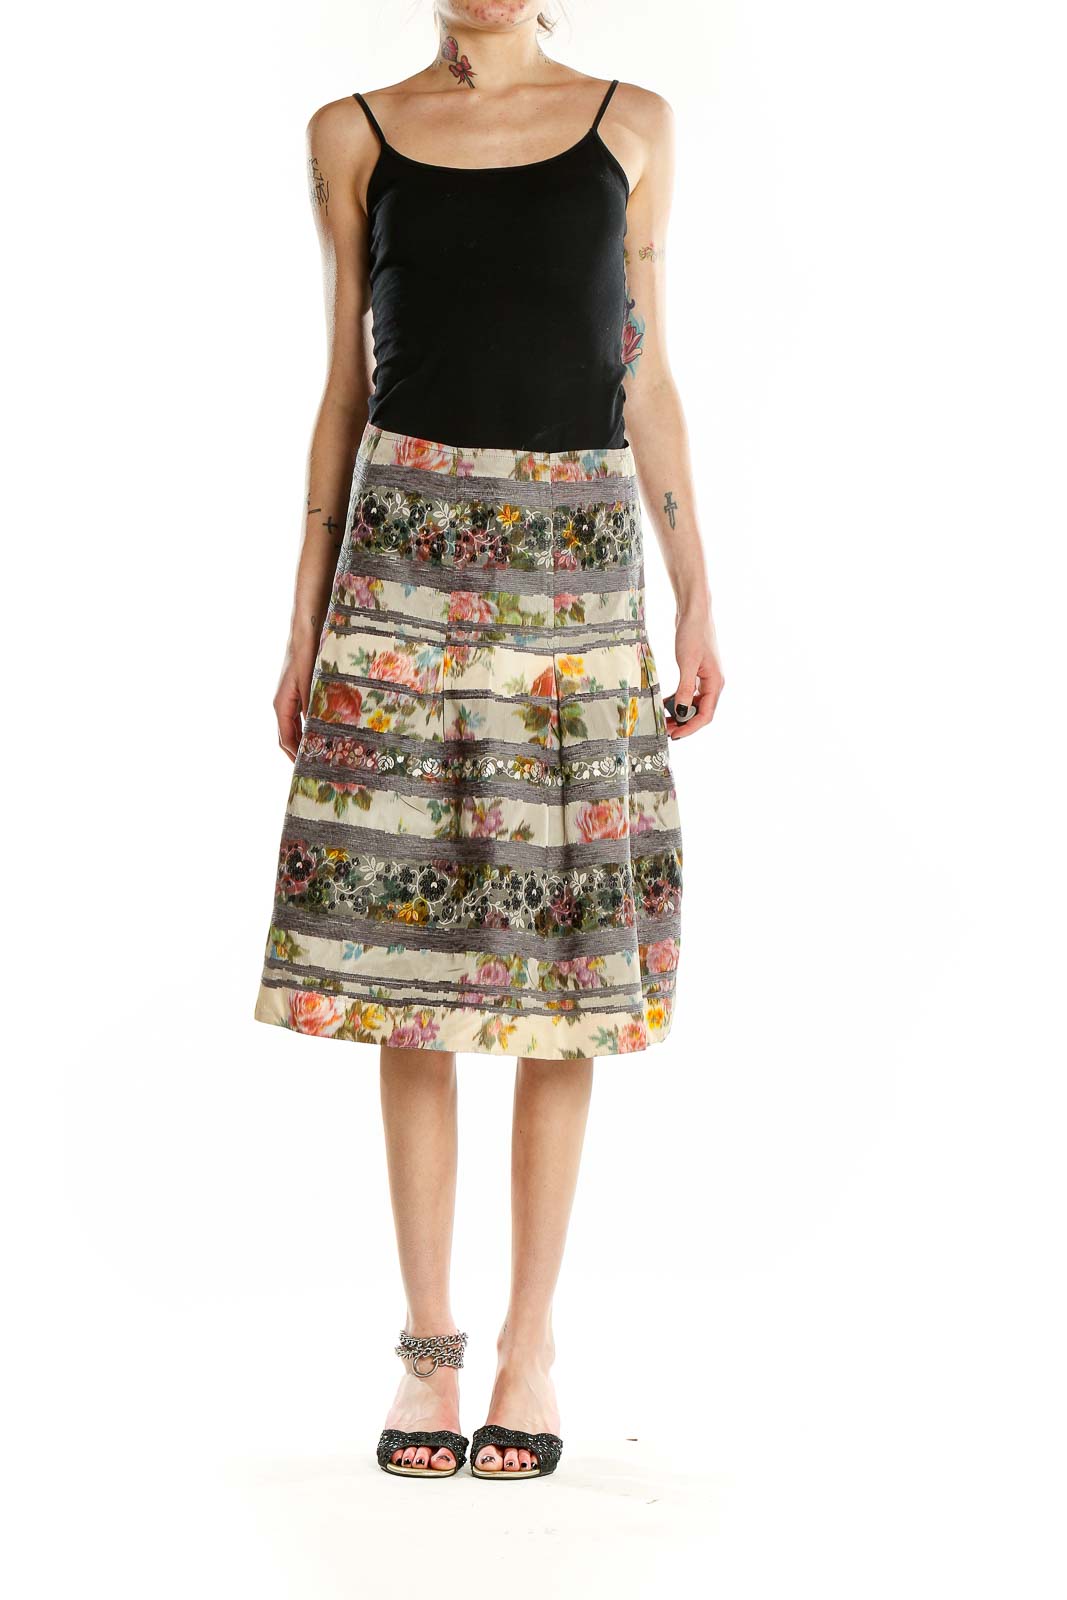 Shop Skirts With Points or Cash | SilkRoll